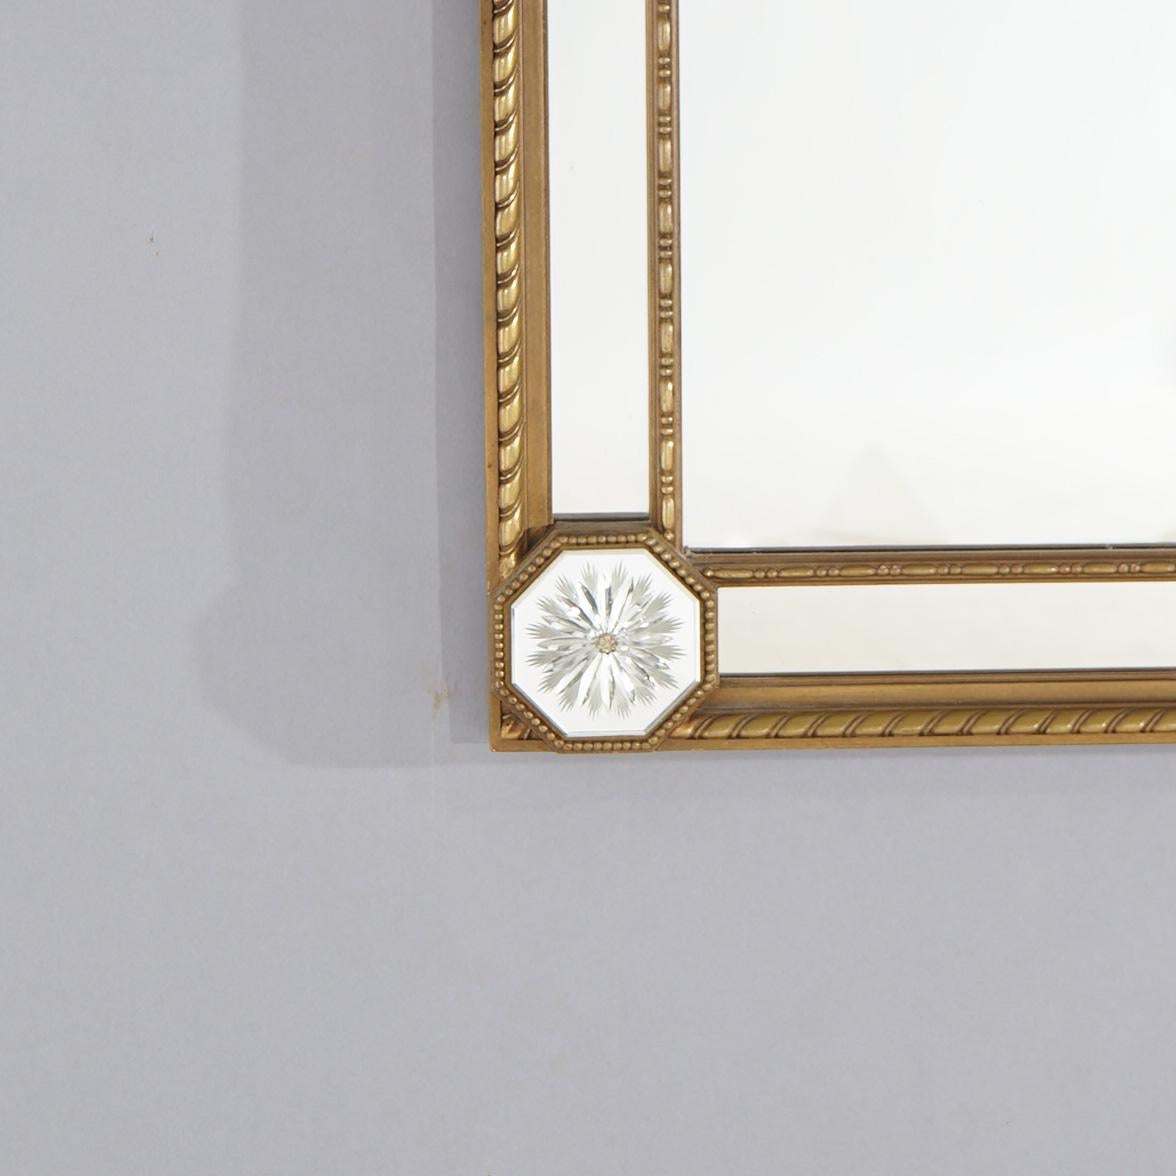 English Chinese Chippendale Regency Style Giltwood Parclose Wall Mirror C1920 For Sale 2